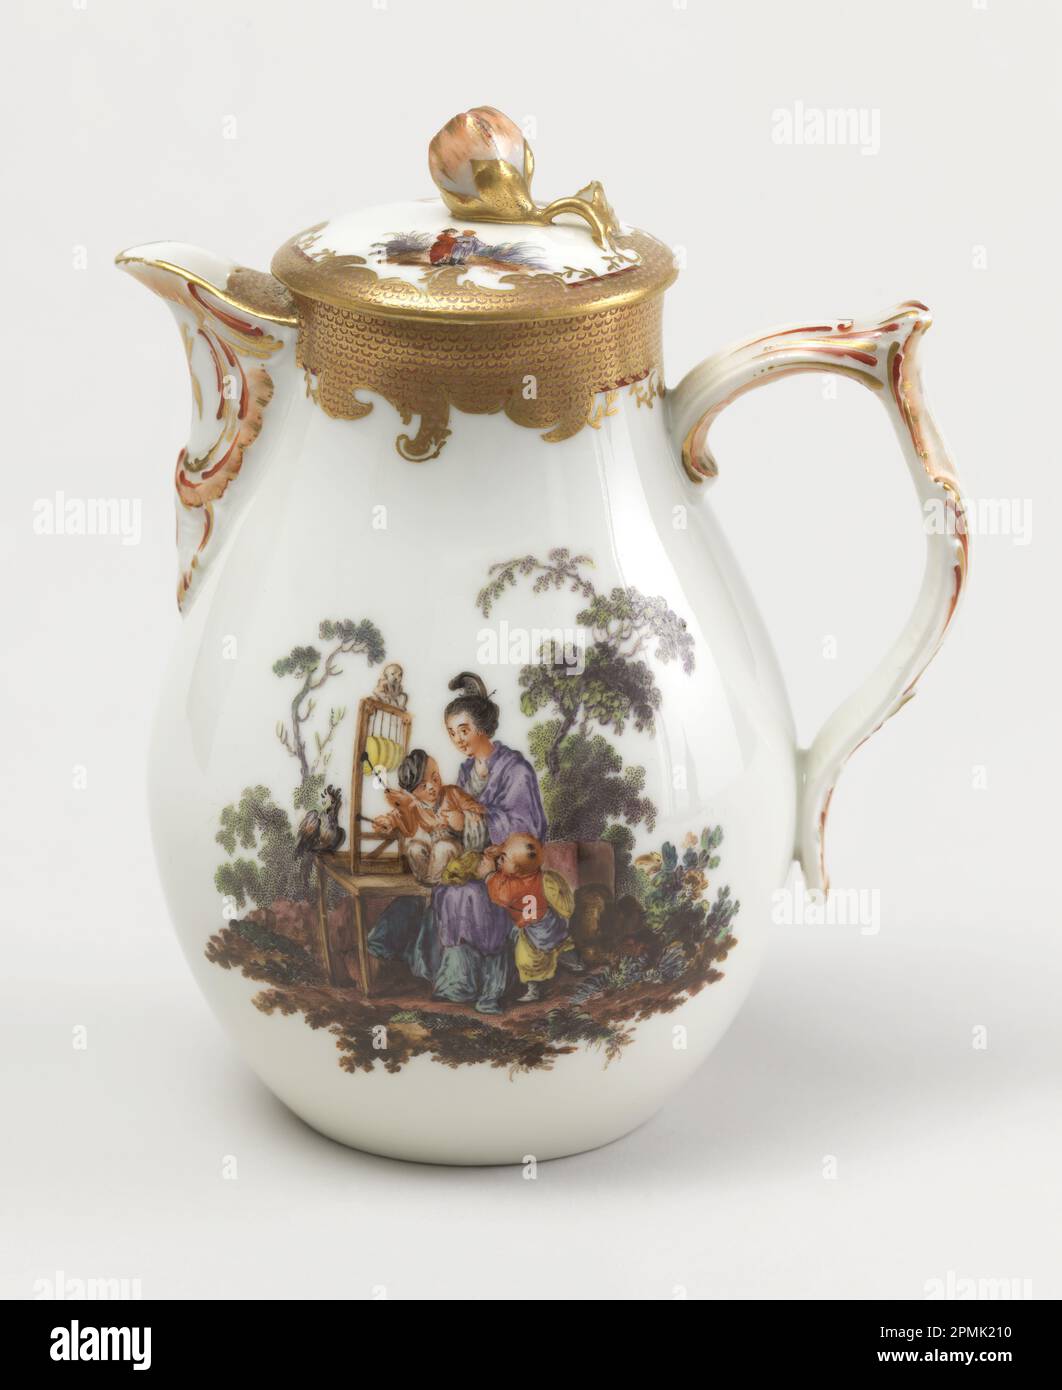 Covered Milk Jug with Chinoiserie Vignettes Milk Jug; Manufactured by Royal Porcelain Manufactory, Berlin (Germany); Style of Jacques-Gabriel Huquier (French, 1730 - 1805), François Boucher (French, 1703–1770); Germany; hard paste porcelain, vitreous enamel, gold Stock Photo